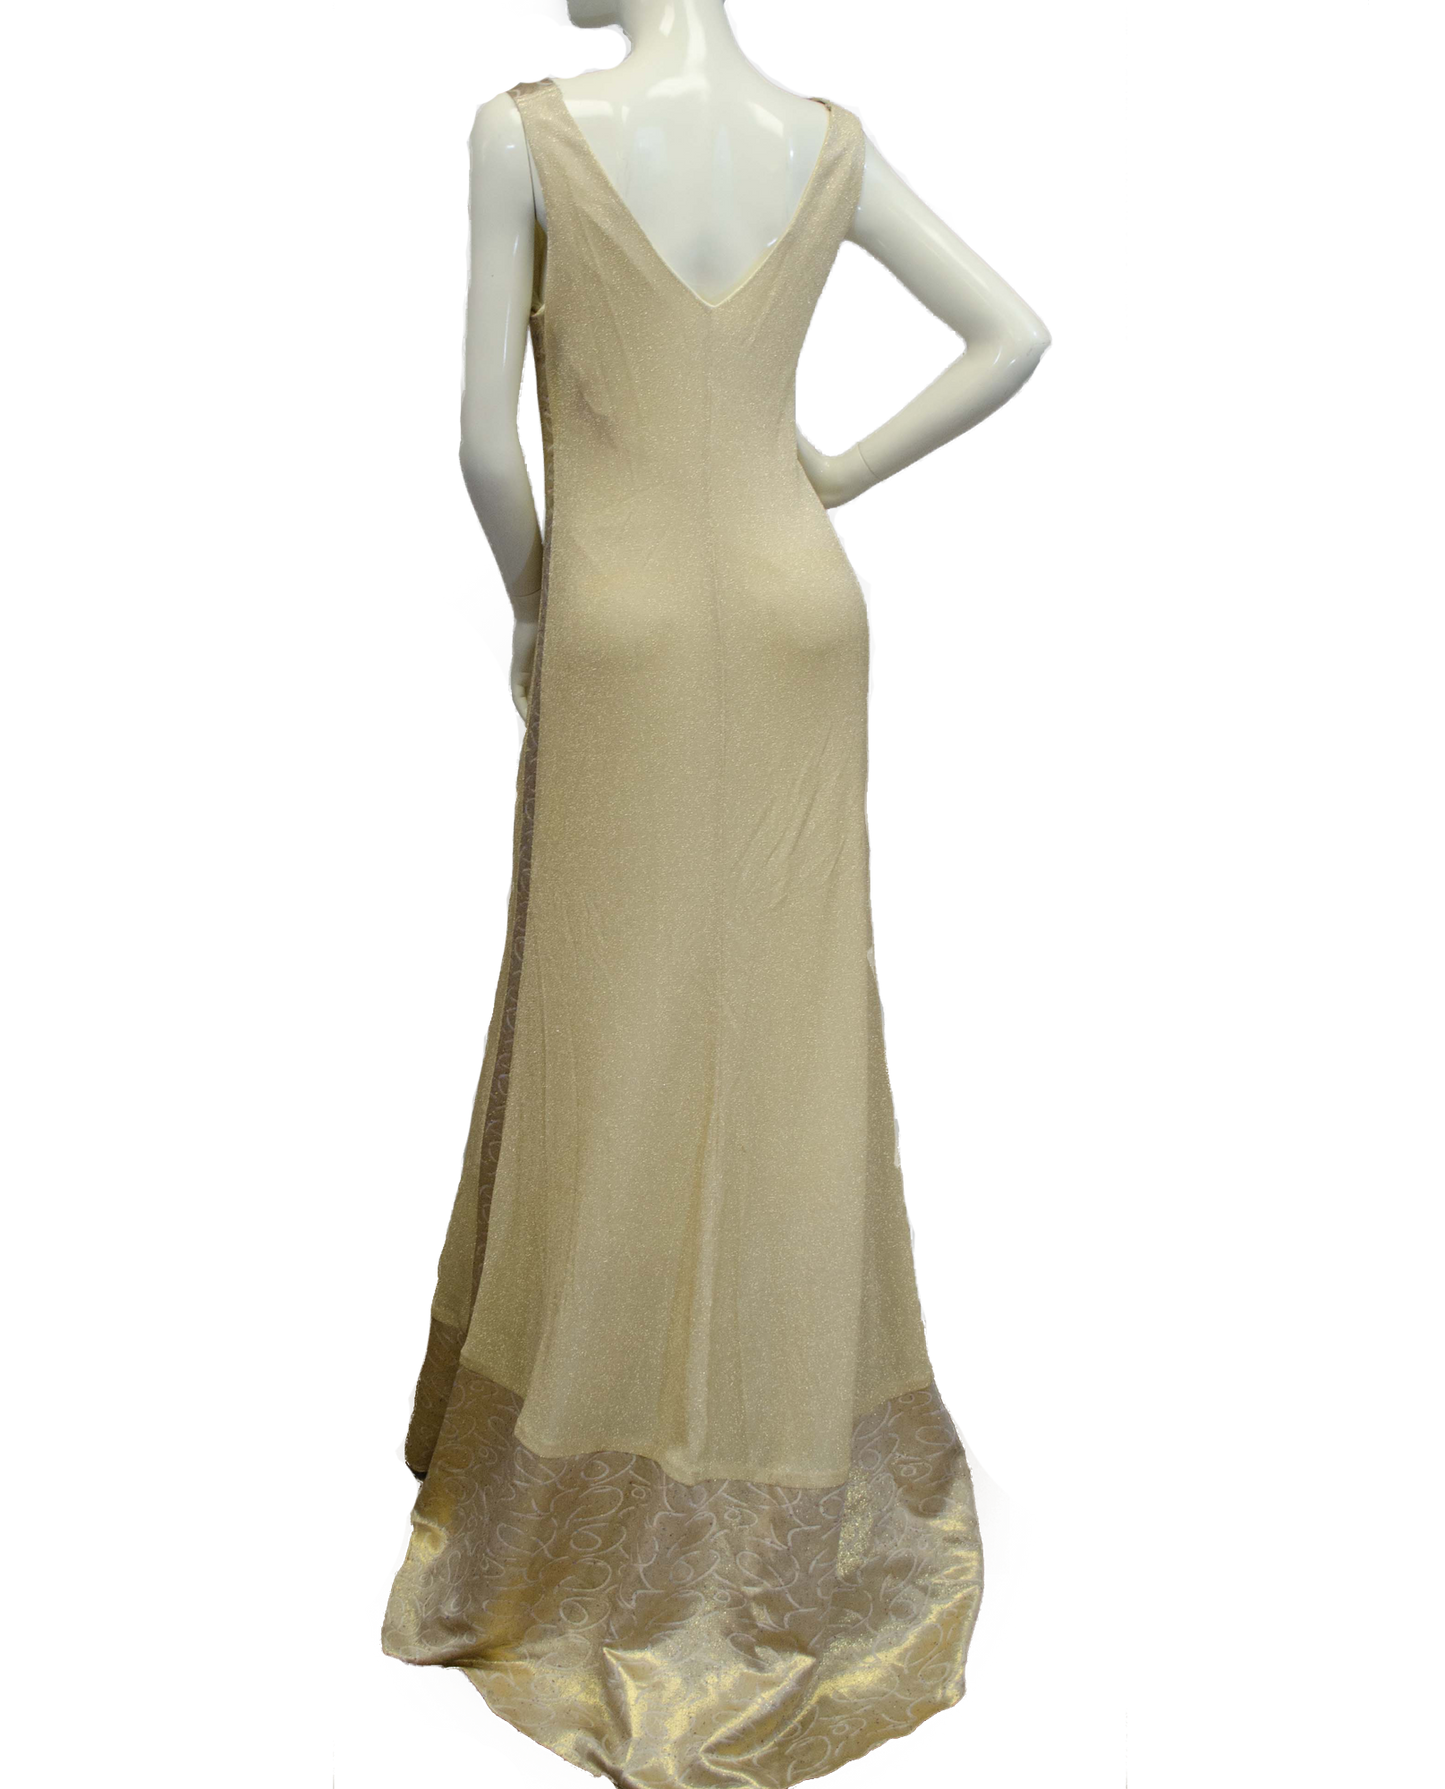 Load image into Gallery viewer, Mardi Gras Gold Dress and Cape Size Small (SKU 000077) - Designers On A Dime - 6
